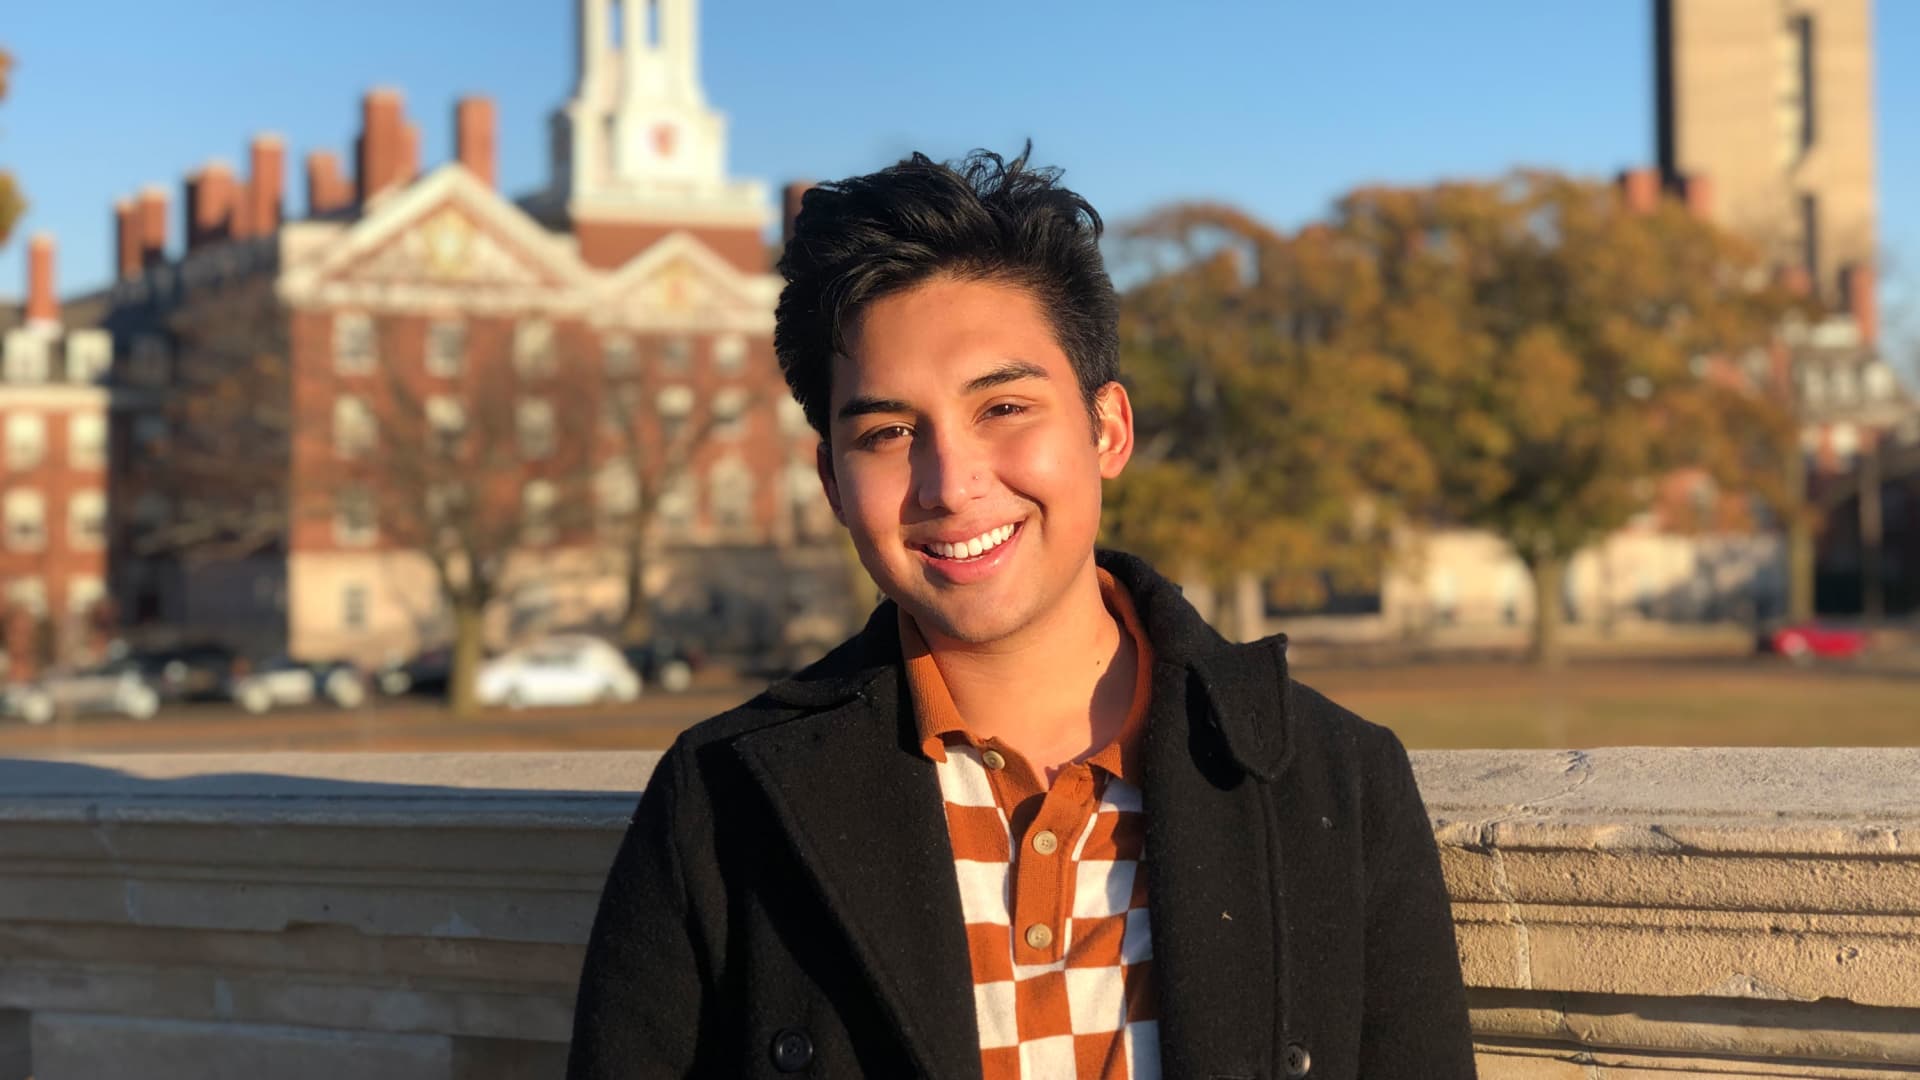 Nicolas Montoya, a Gates Scholar at Harvard University majoring in social studies in global health and health policy, took a gap year for family reasons as well as to gain real-world experience.